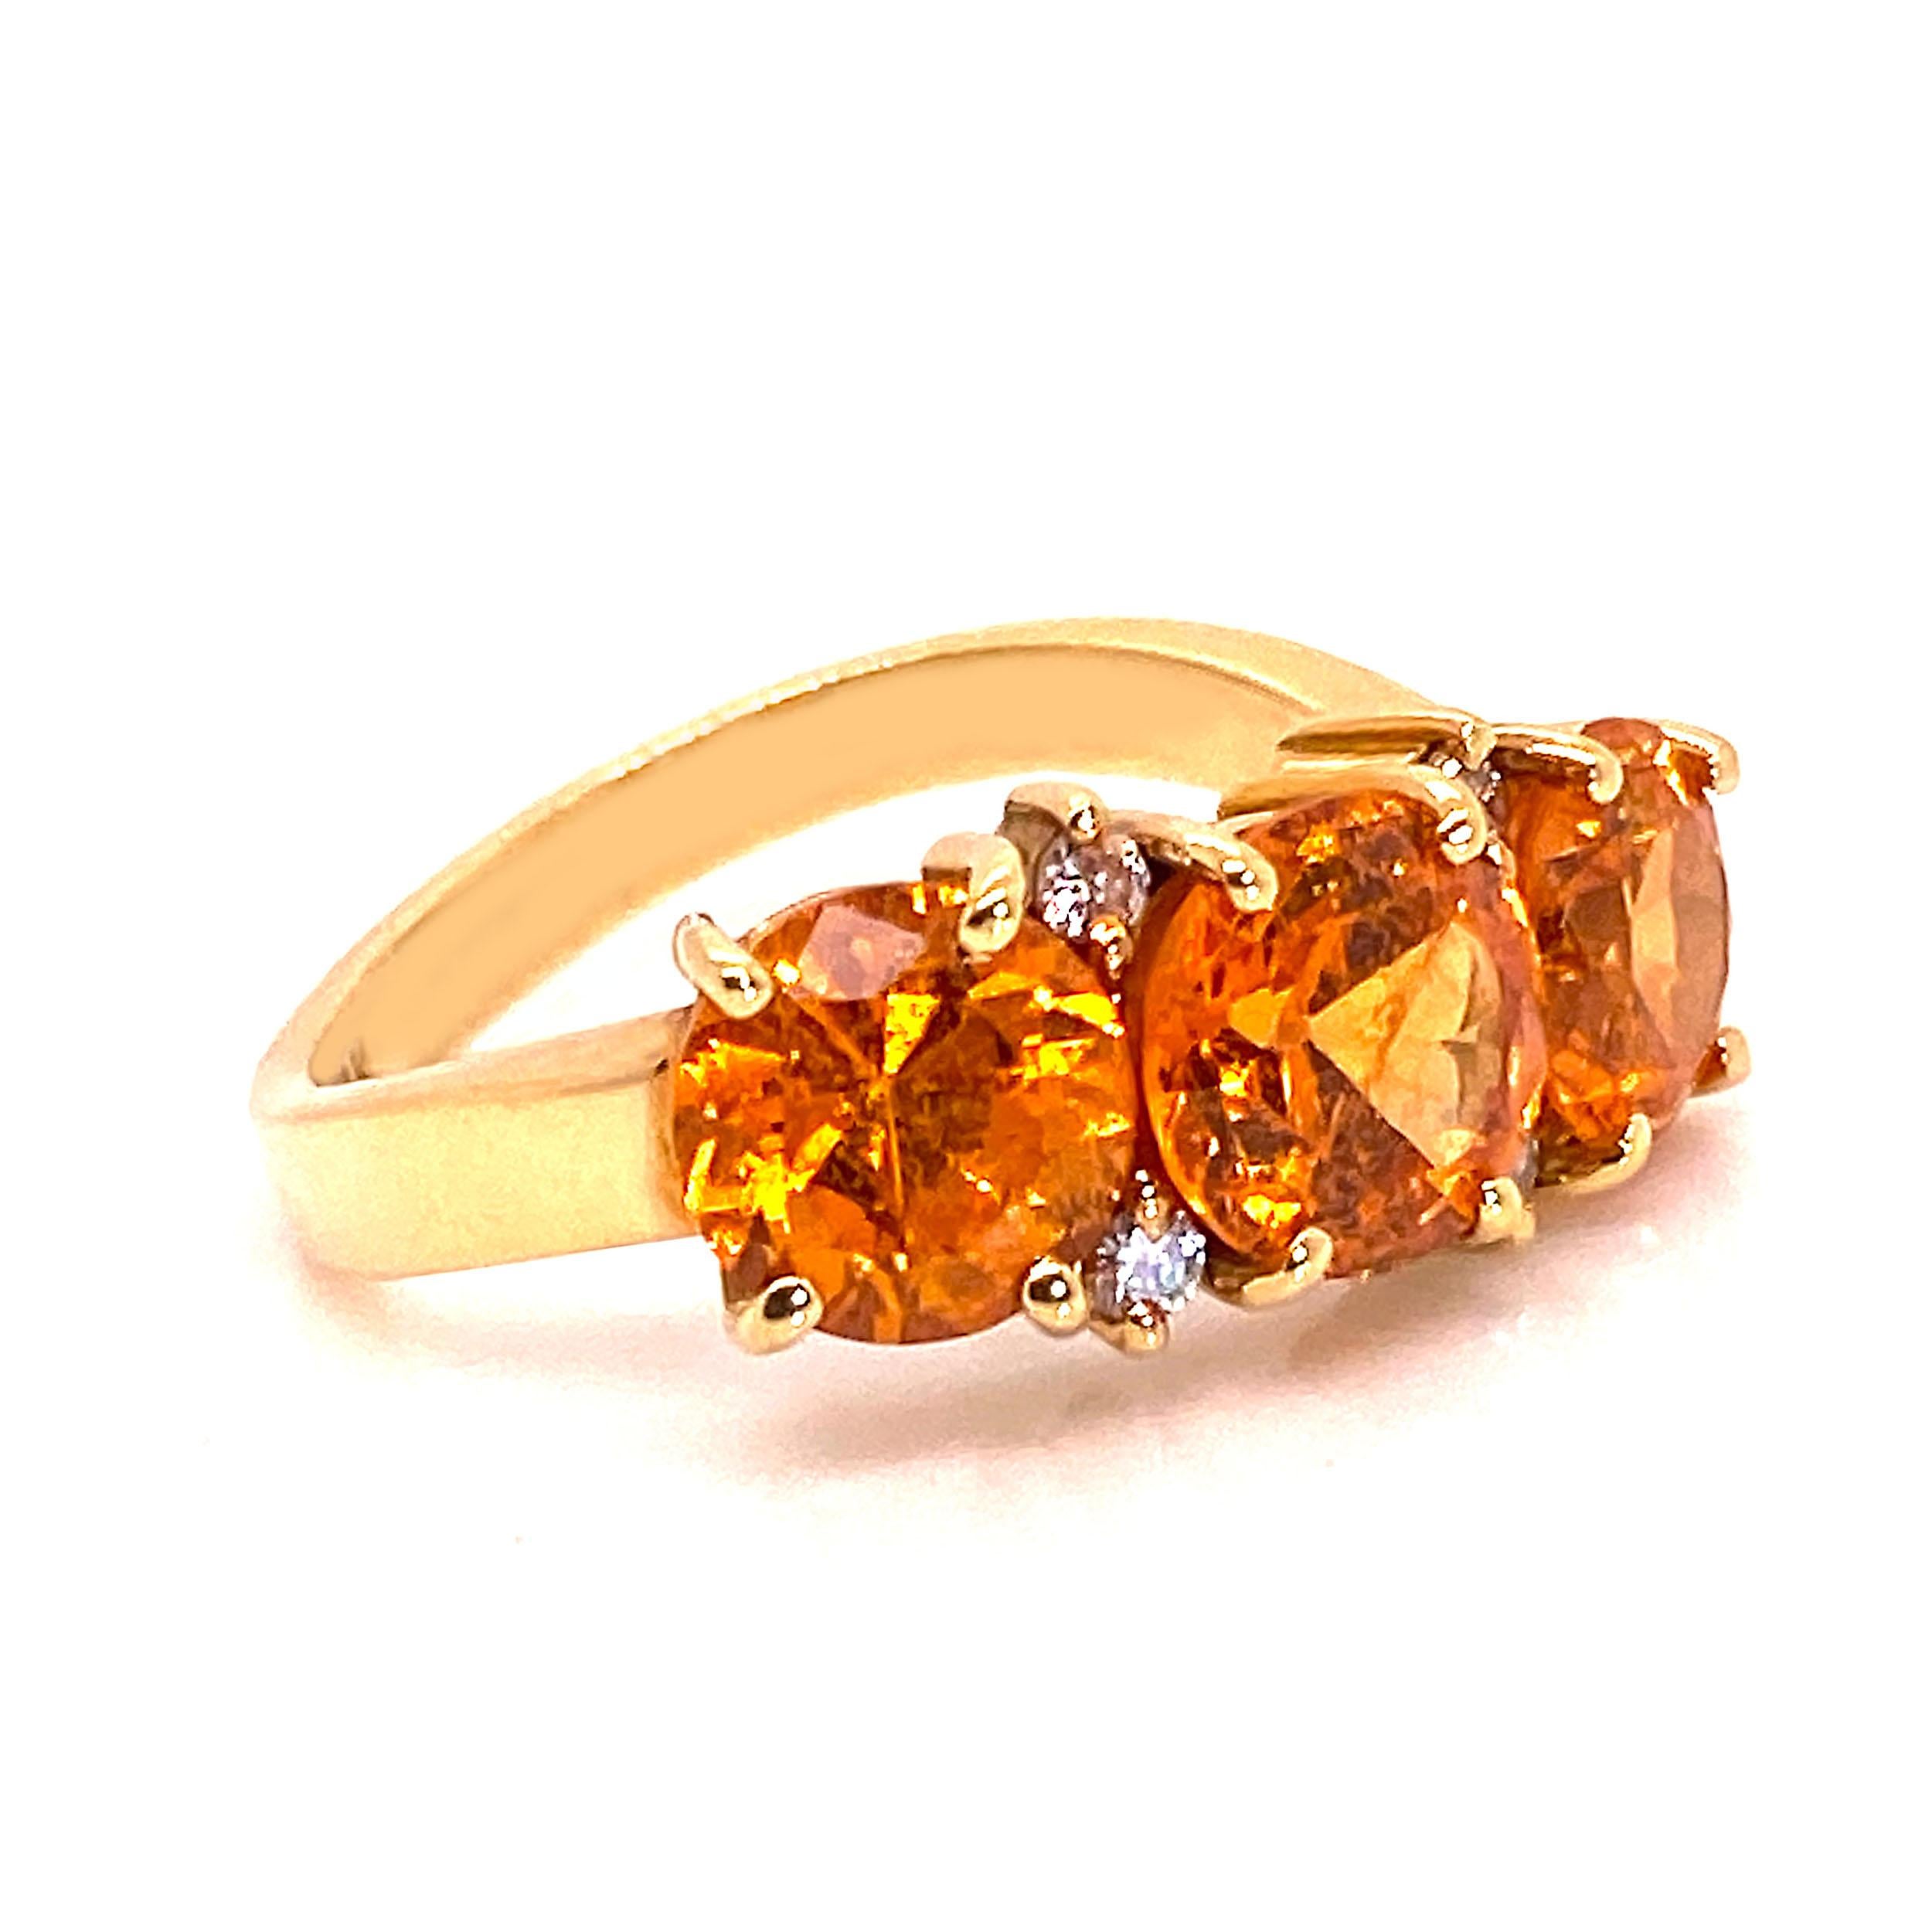 Hand made 18K yellow gold ring with three round 6.5-7.5 MM brilliant orange Spessartite garnets of approximately 4.5 carats total weight. The sparkling Spessartite garnets are enhanced by four diamonds of approximately 0.08 carats total weight. 